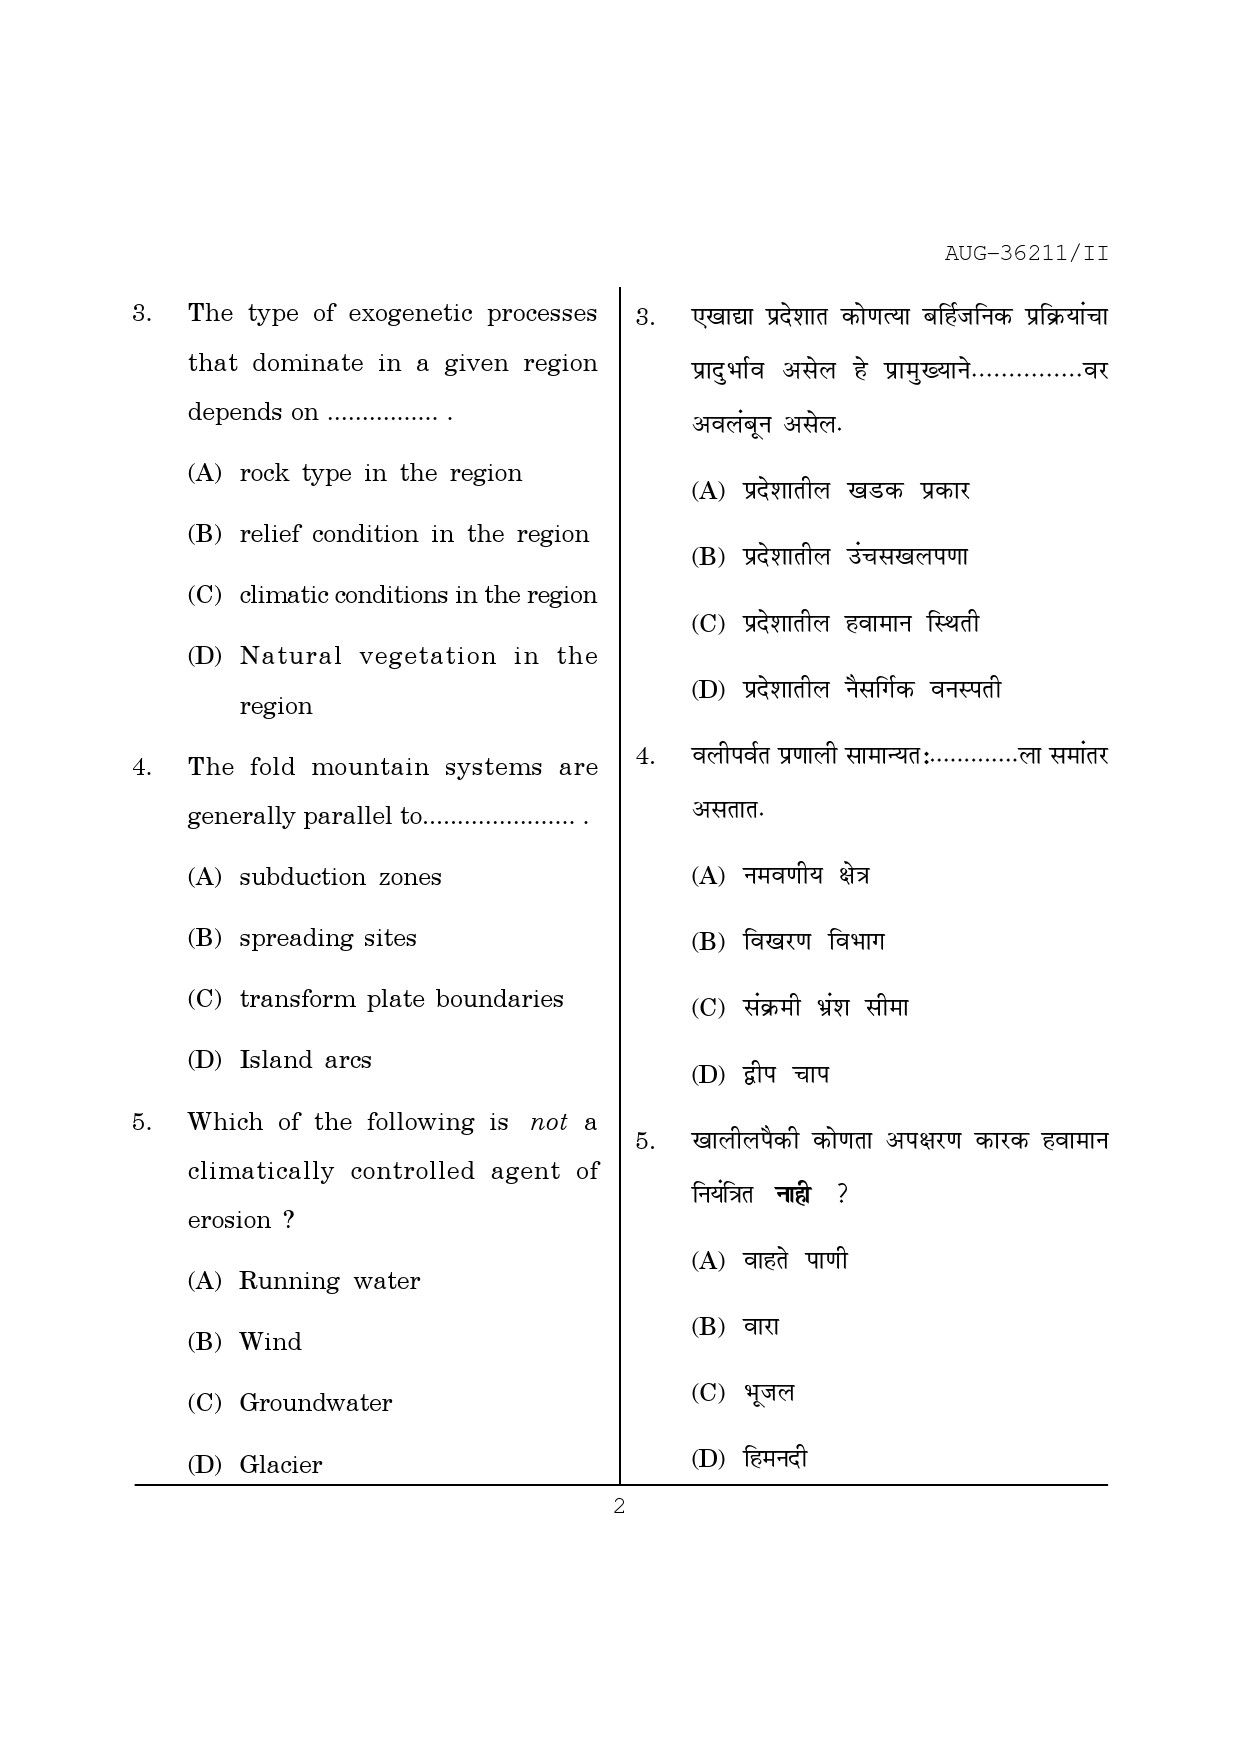 Maharashtra SET Geography Question Paper II August 2011 2